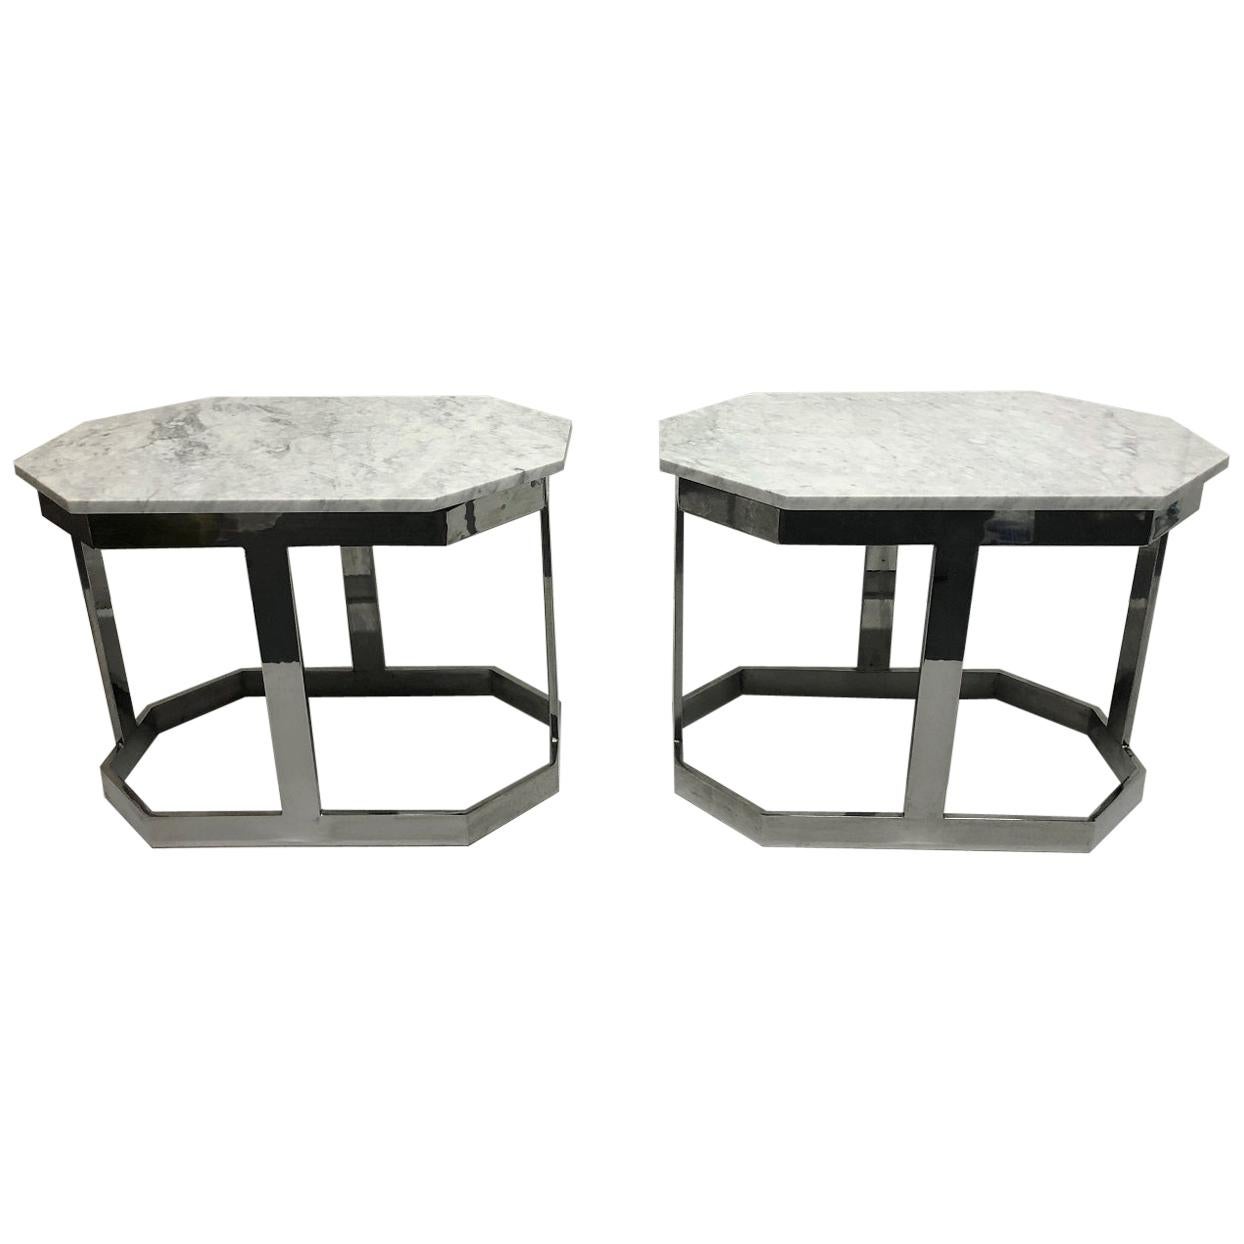 Pair of Chrome and Carrara Marble Octagonal Top Tables